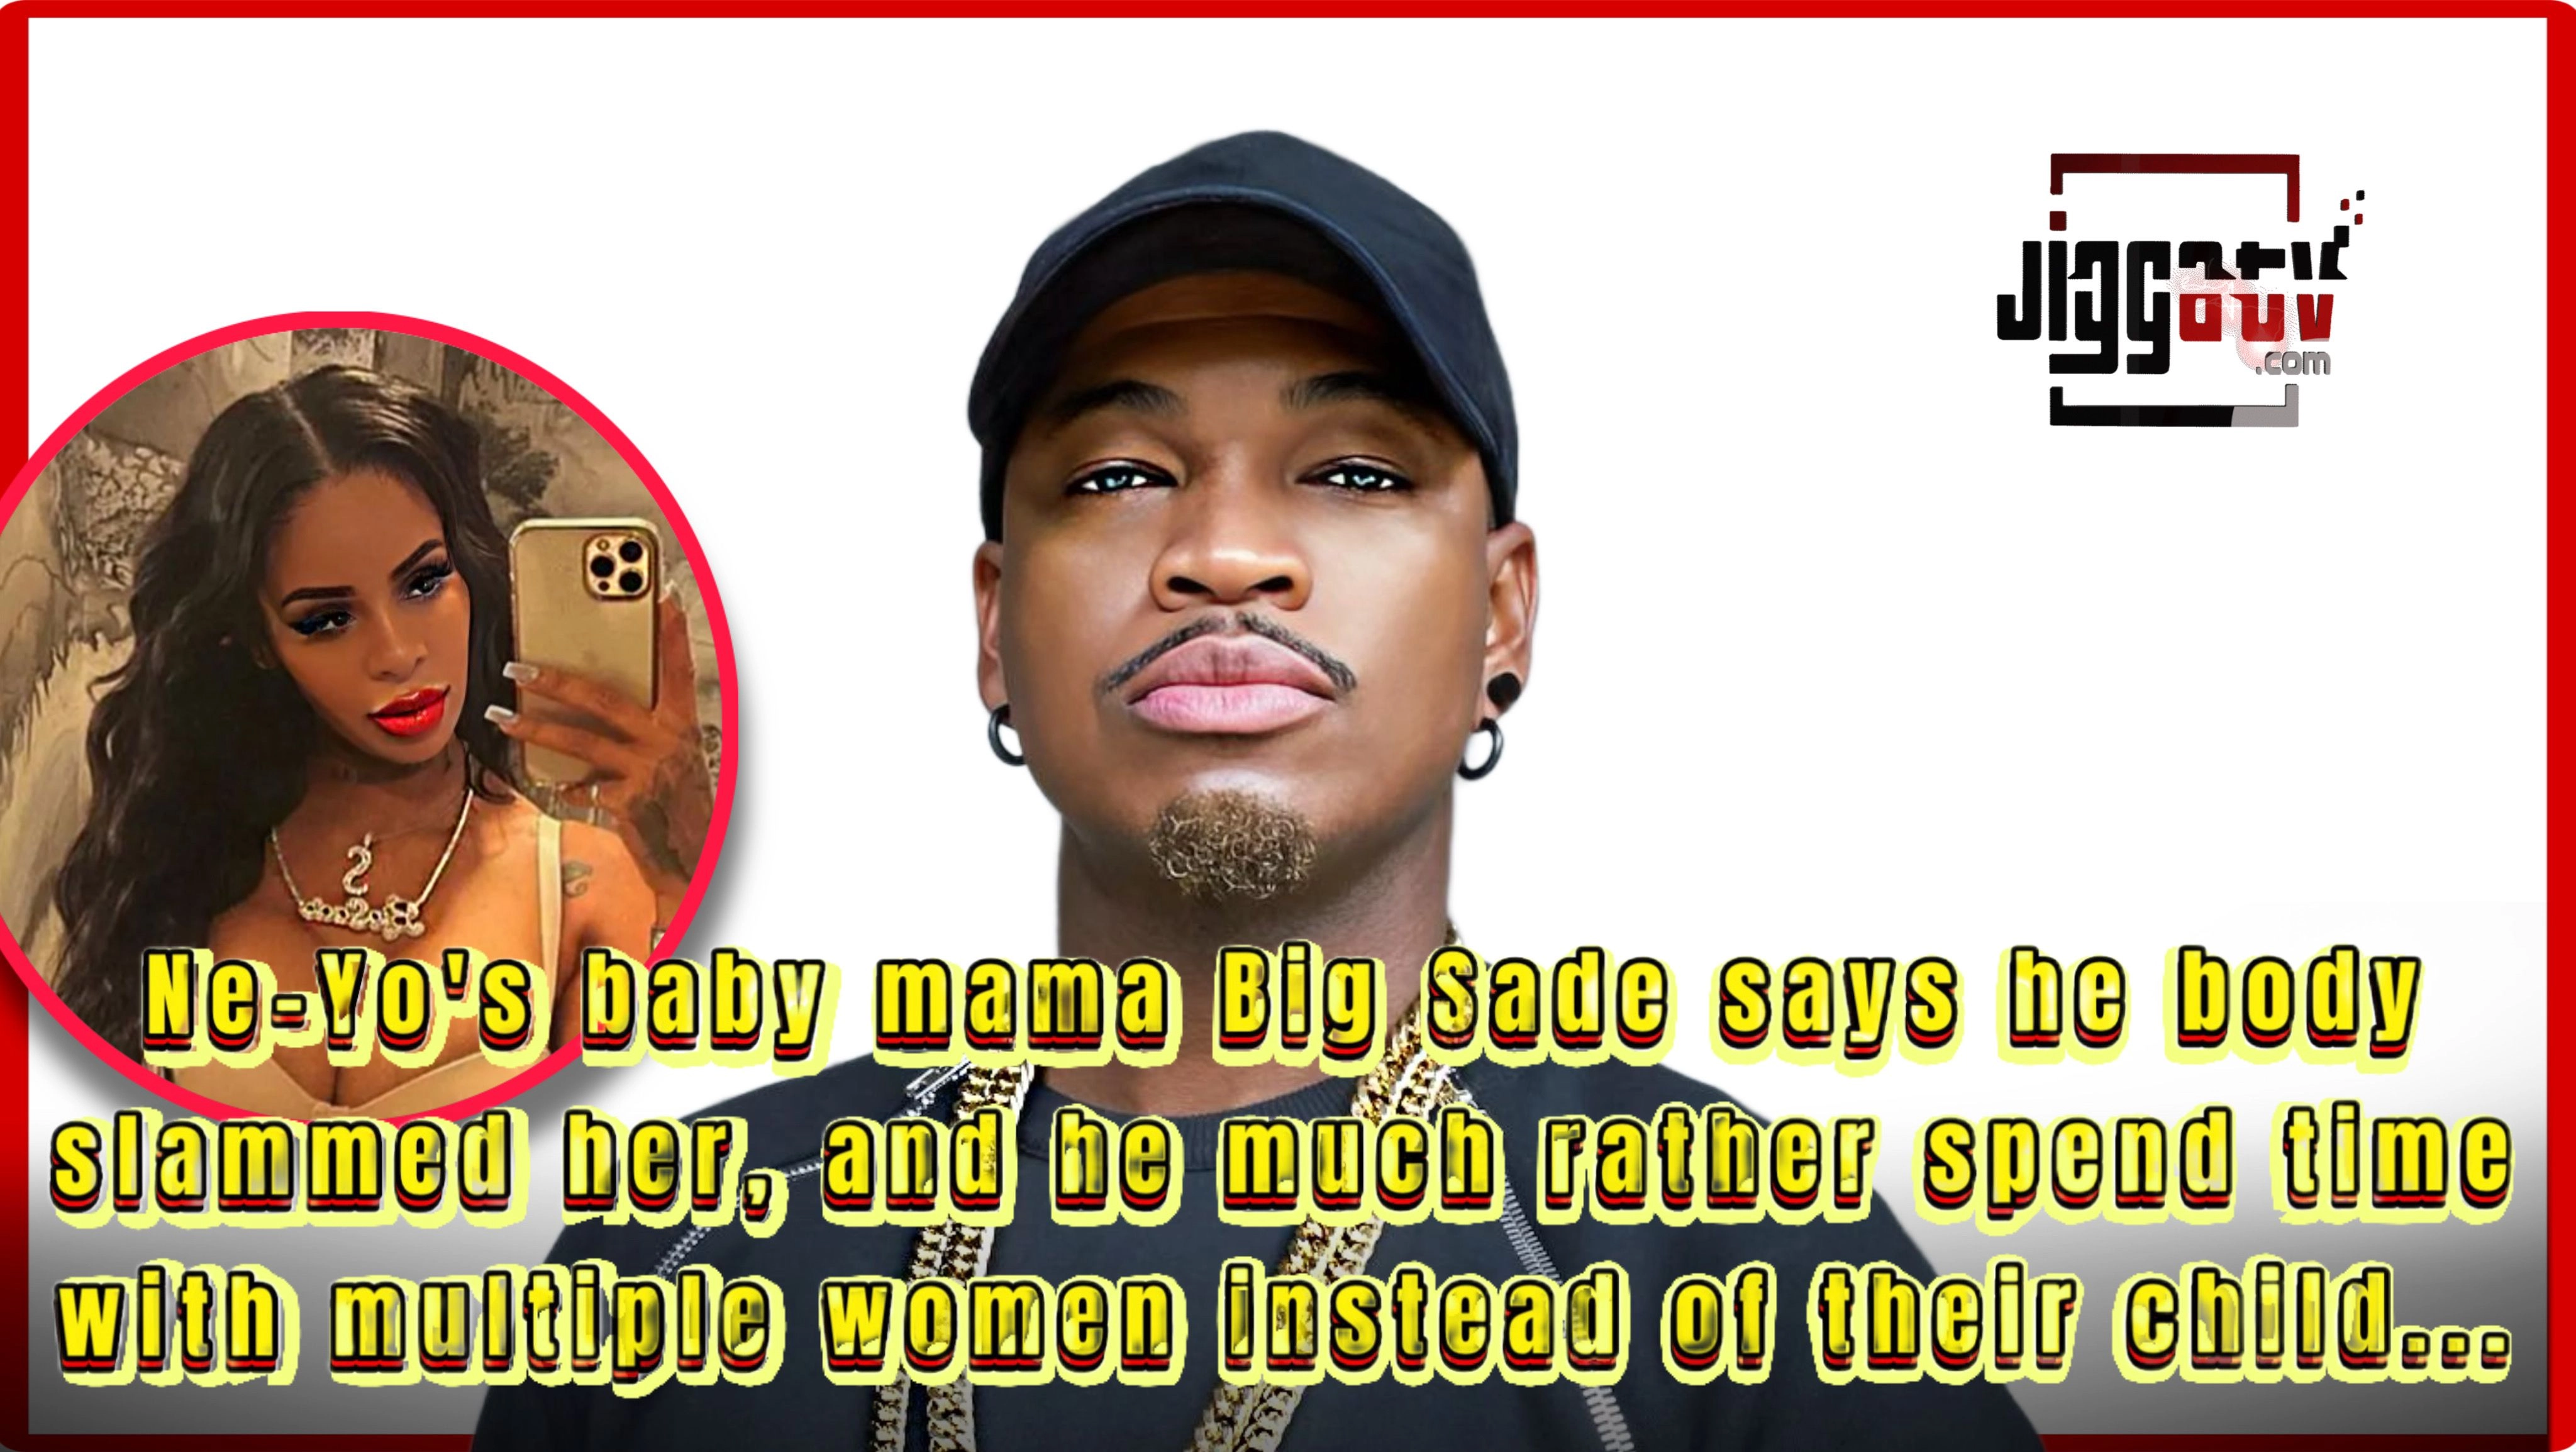 Ne-Yo’s baby mama Big Sade says he body slammed her, and he much rather spend time with multiple women instead of their child...